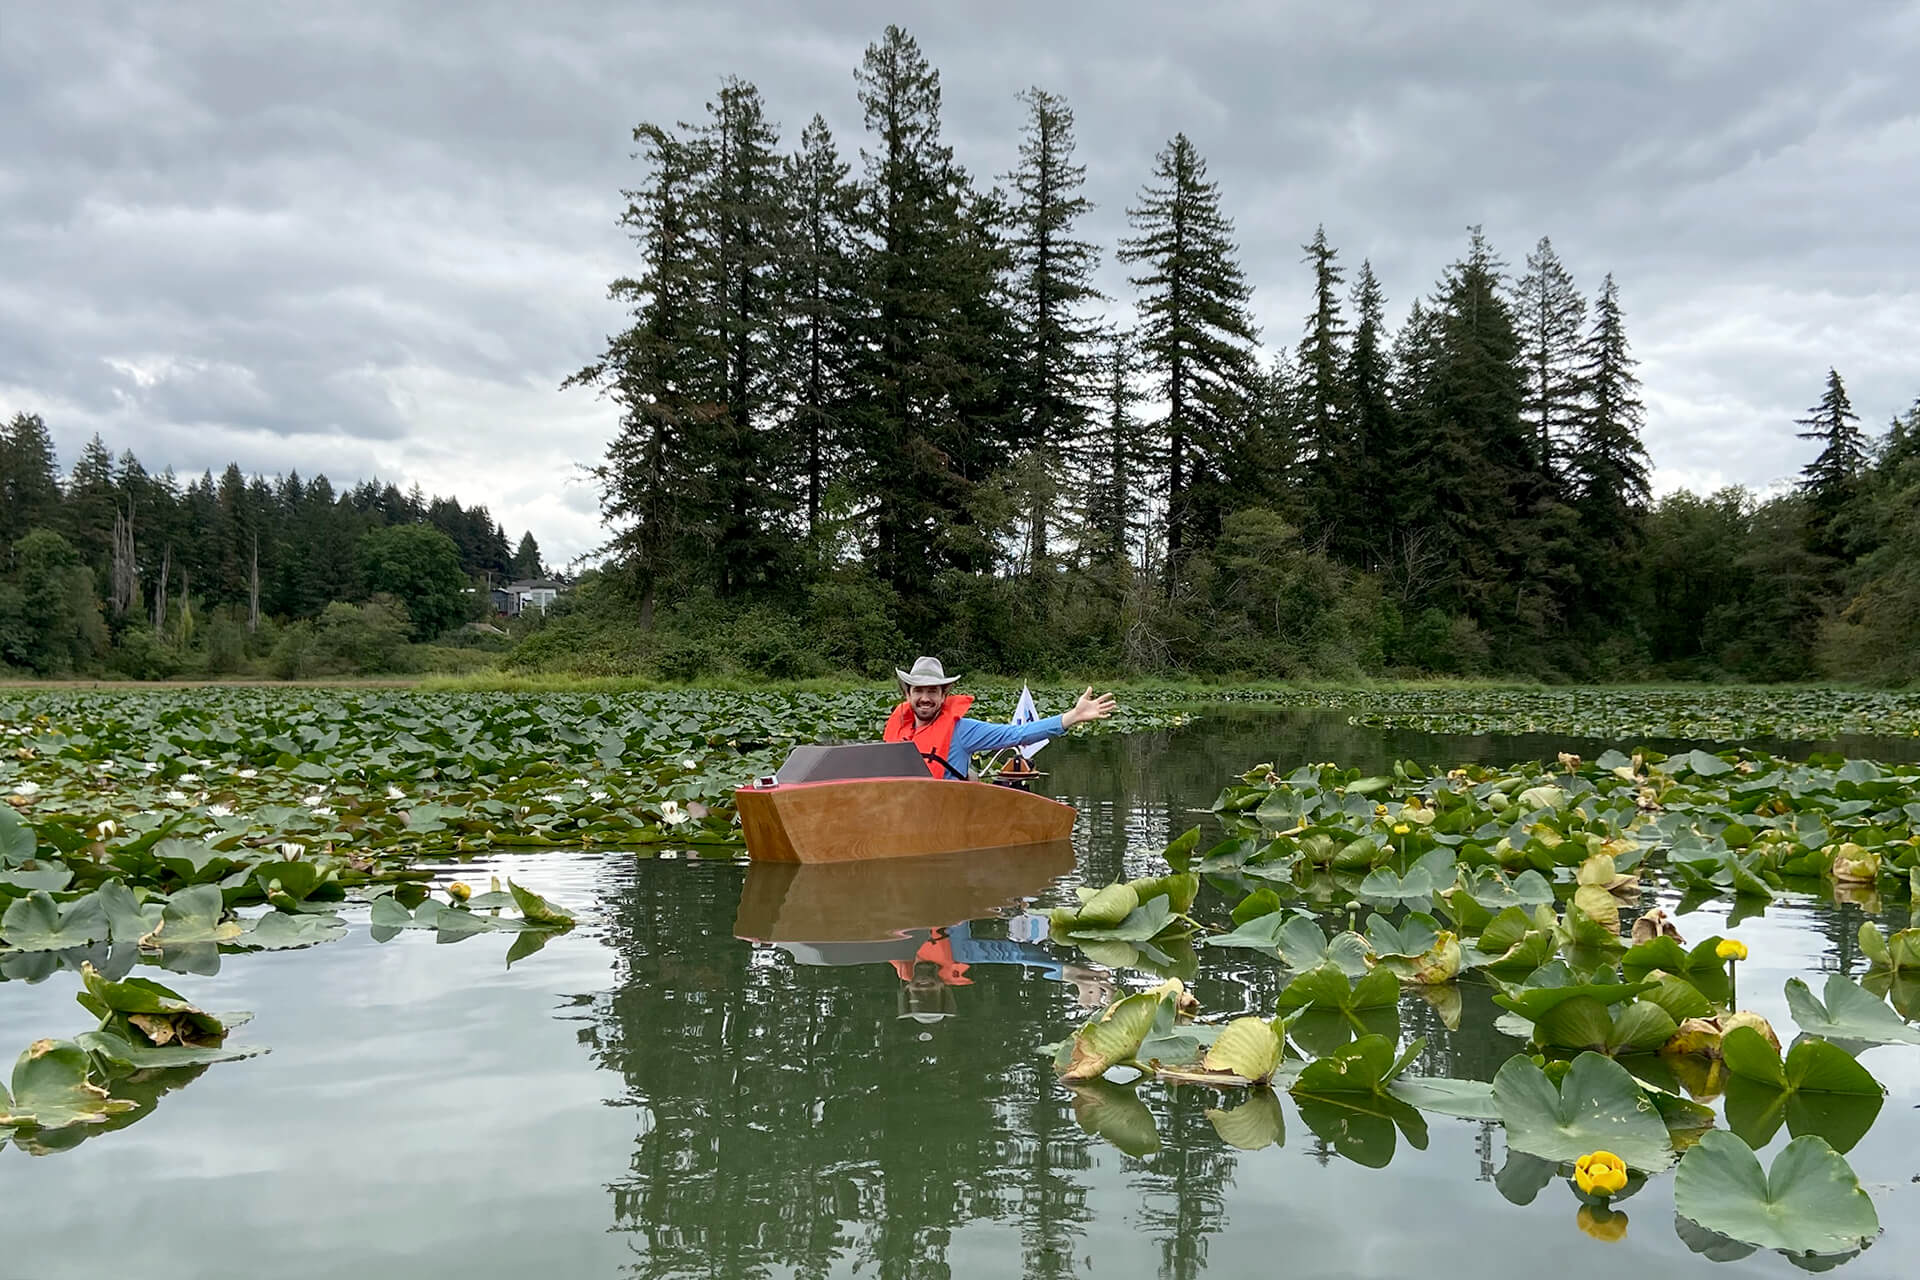 A mini boat in the middle of a large lilly pad forest